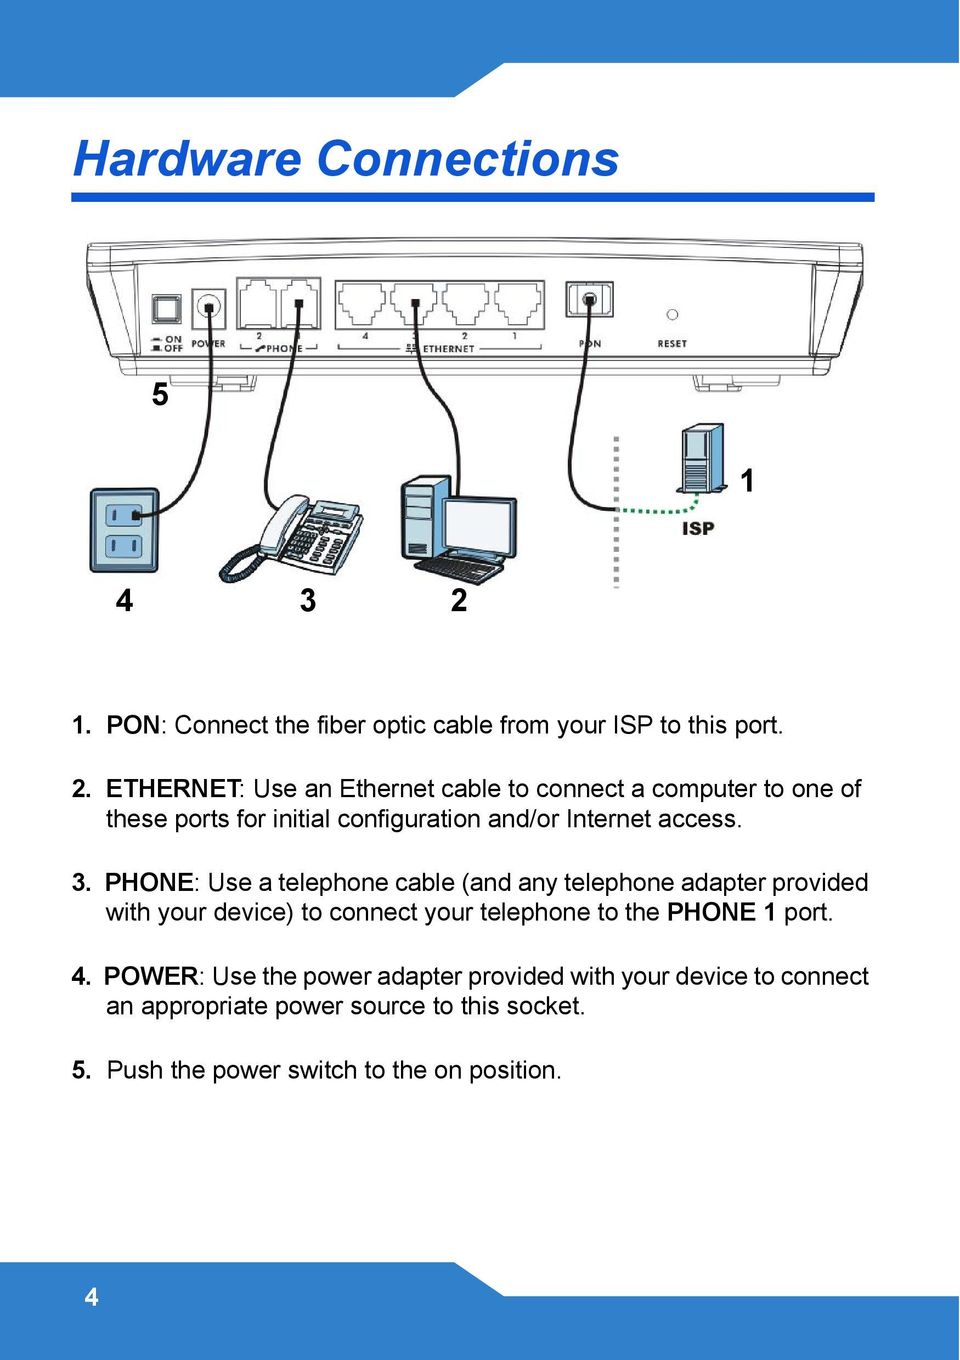 ETHERNET: Use an Ethernet cable to connect a computer to one of these ports for initial configuration and/or Internet access. 3.